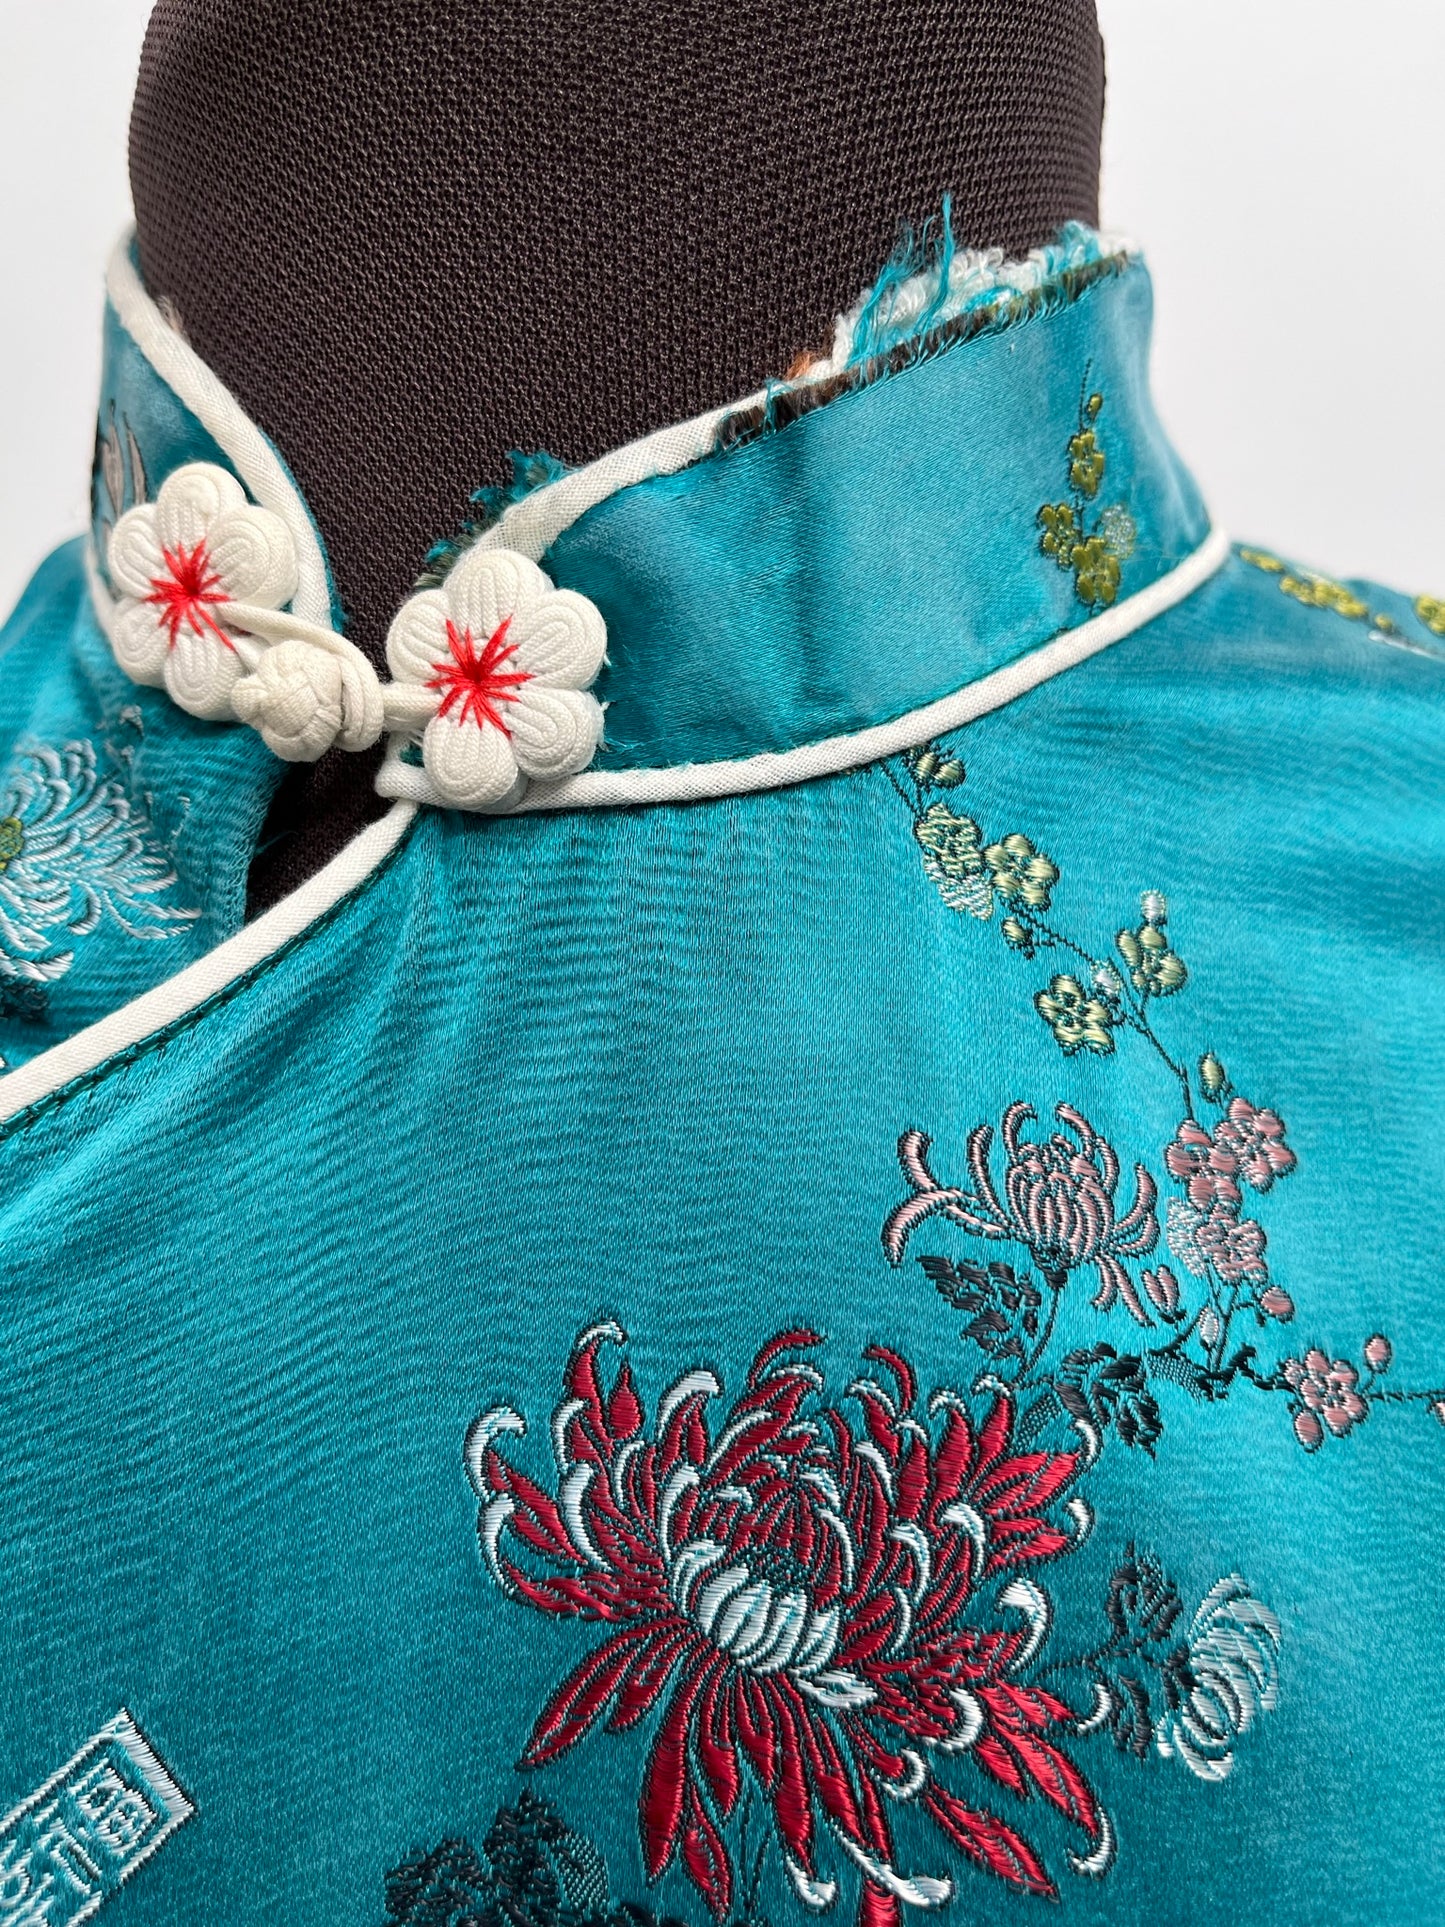 Ladies Vintage Chinese Cheongsam style Turquoise Dress - Traditional Costumes & Clothing